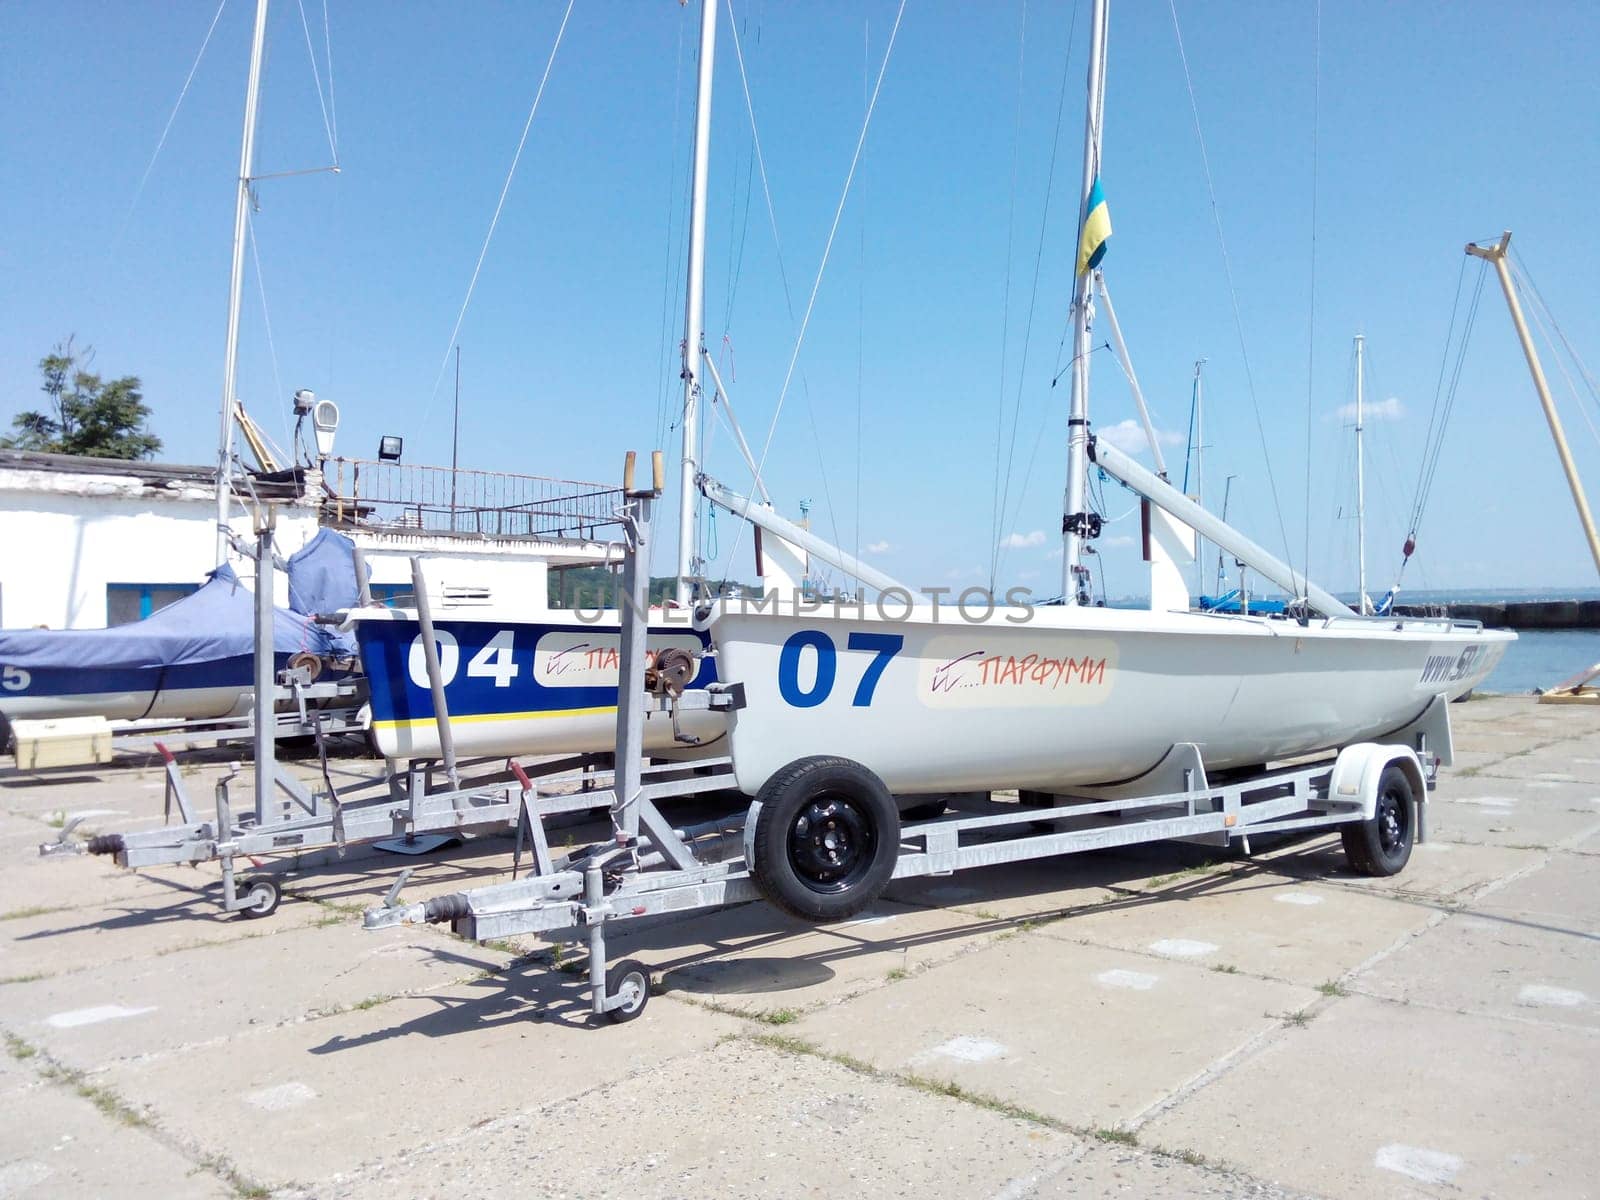 FINA's small yachts are parked on trailers in the harbor. High quality photo